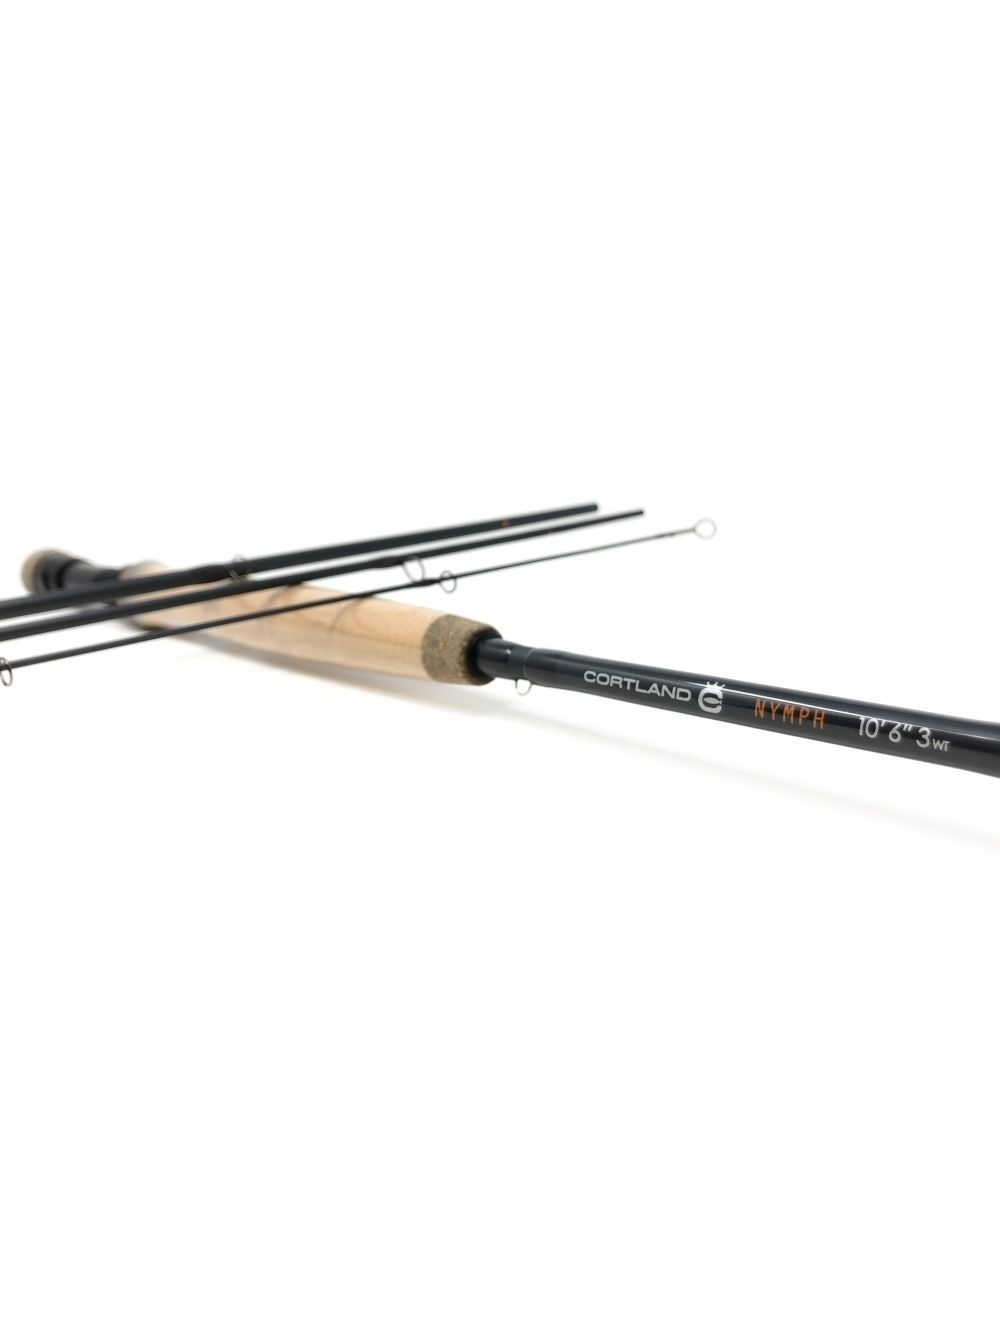 Cortland Nymph Series Fly Rod TheFlyStop